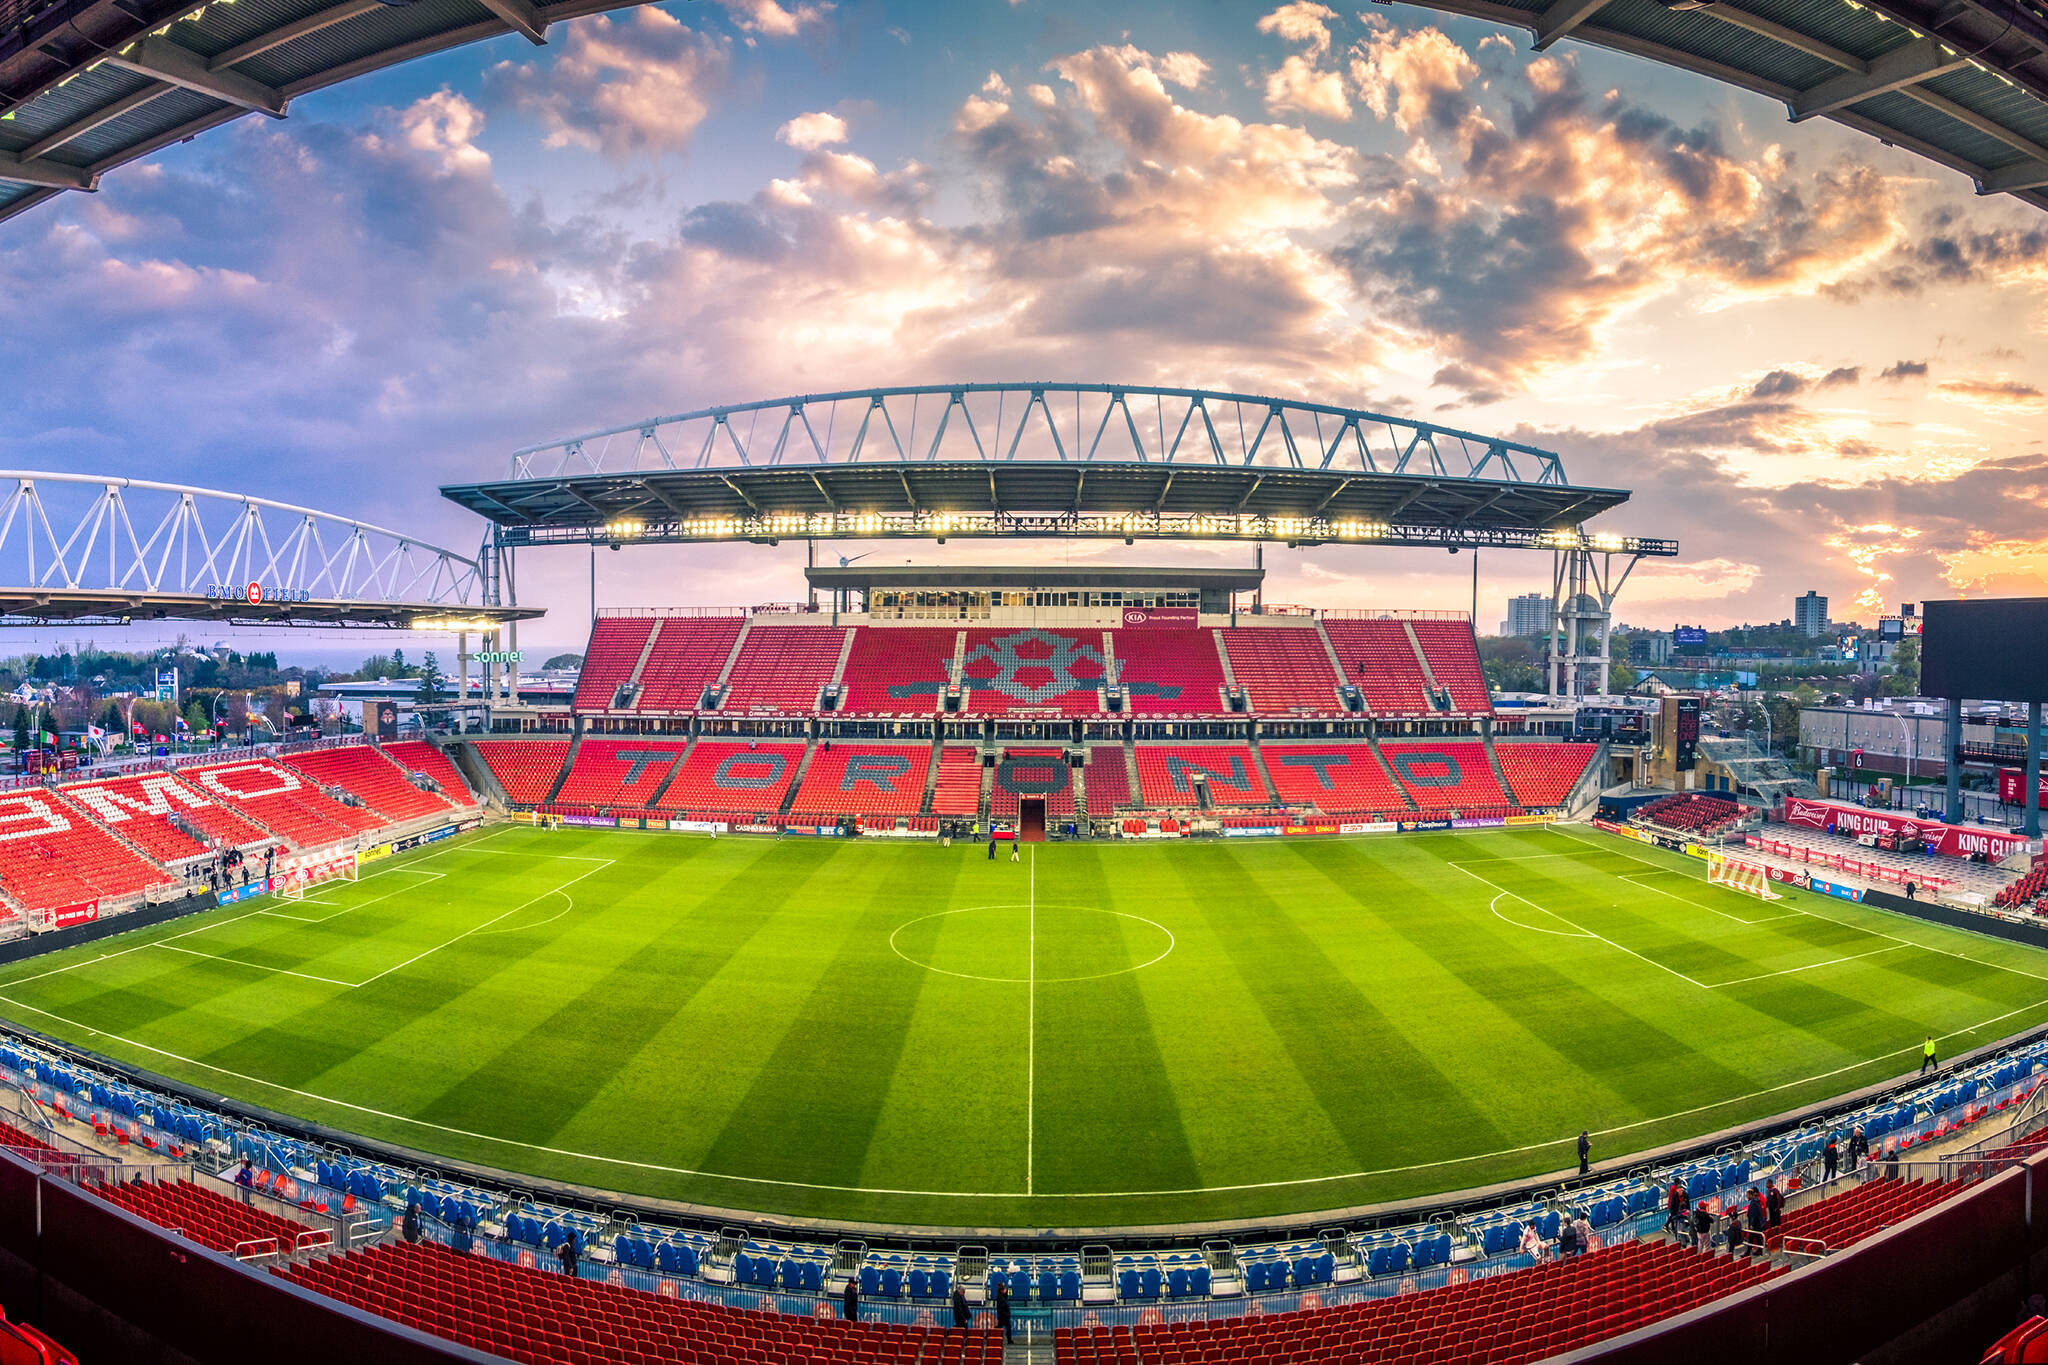 Toronto FC officially allowed to start playing home games at BMO Field